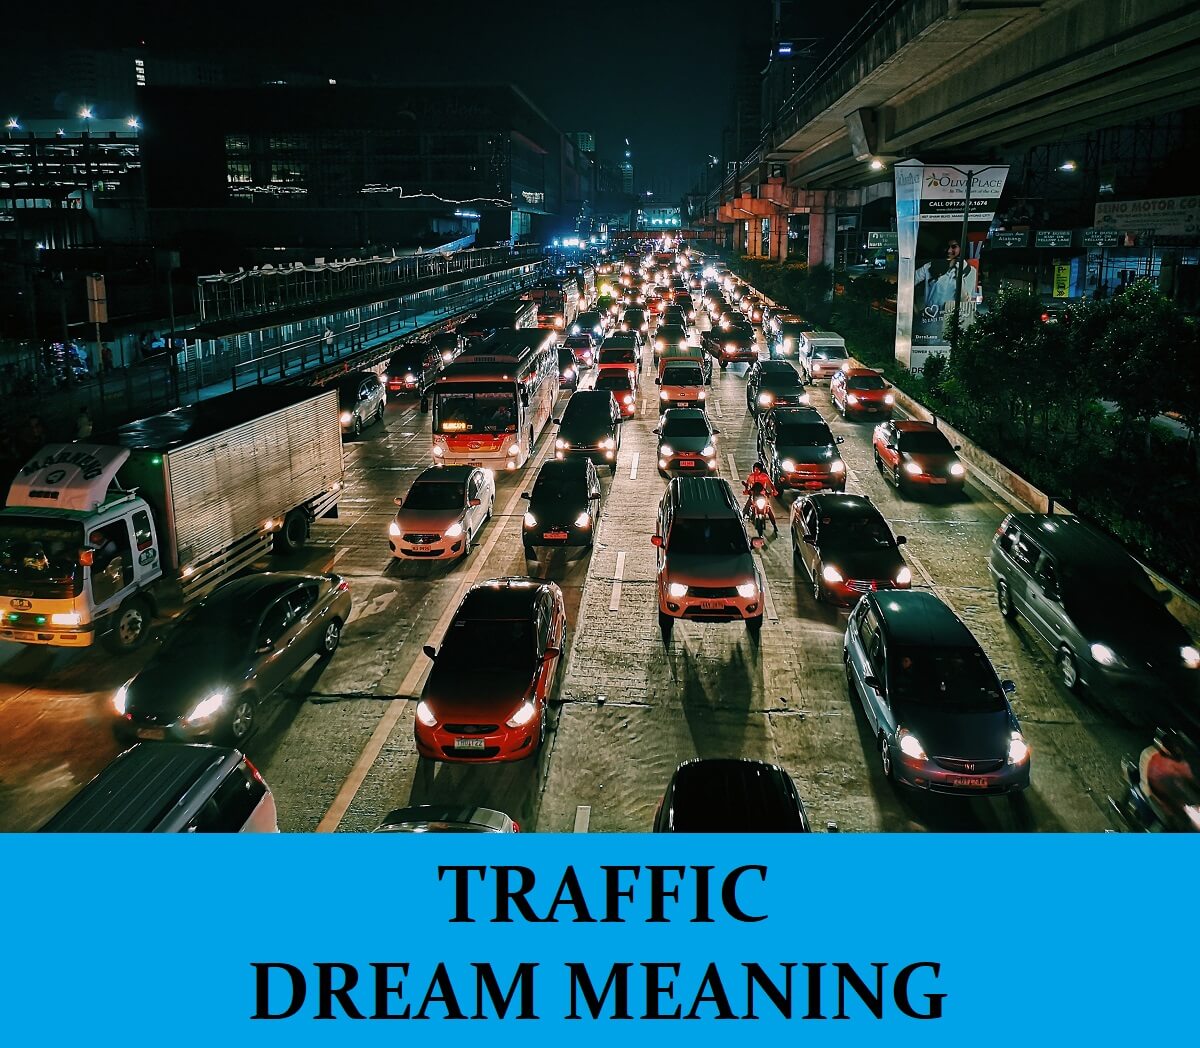 Dream About Traffic